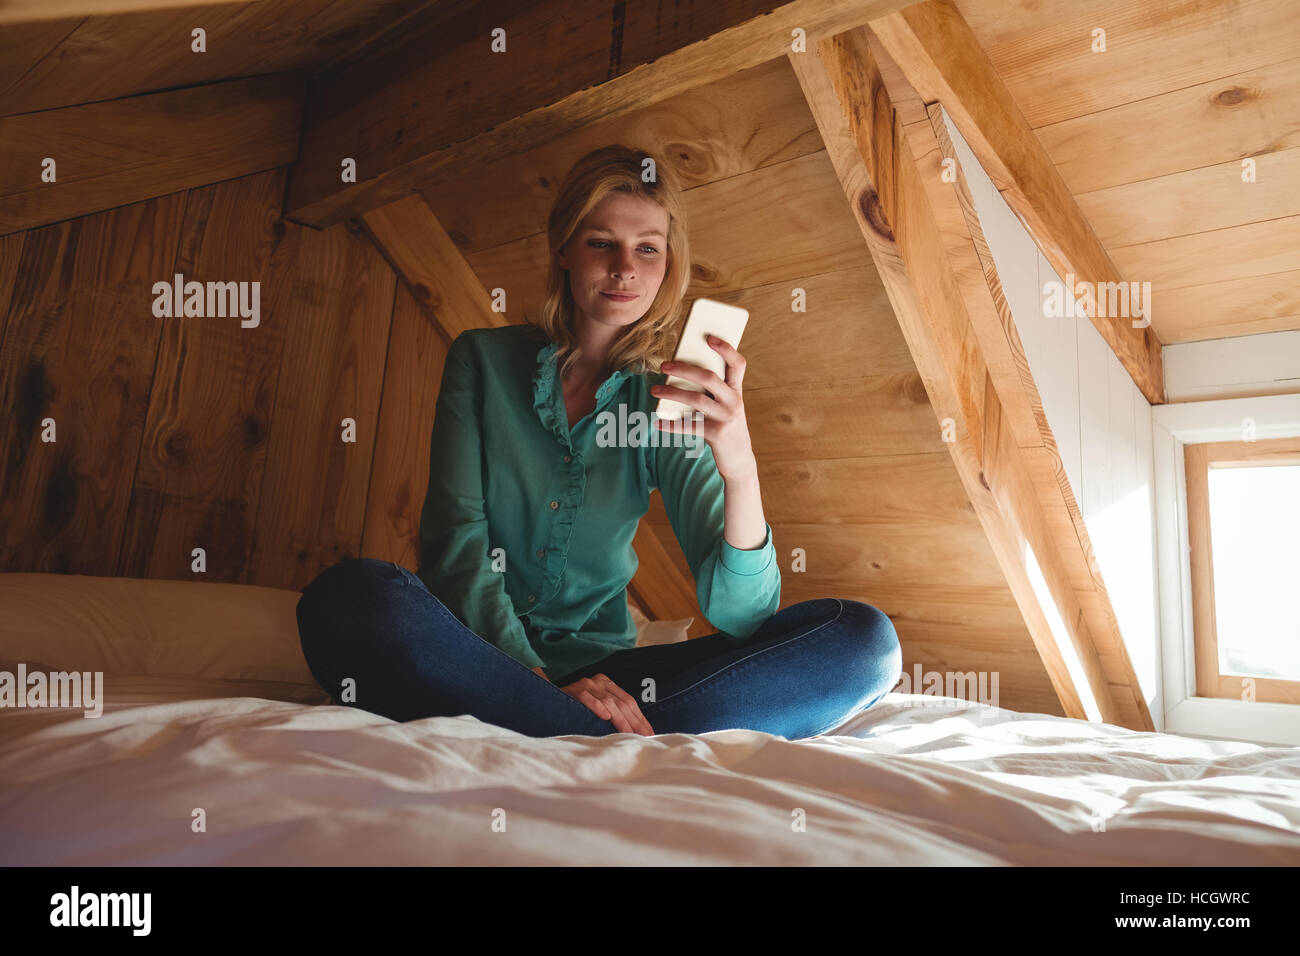 Beautiful woman sitting on bed and using mobile phone in bedroom Banque D'Images